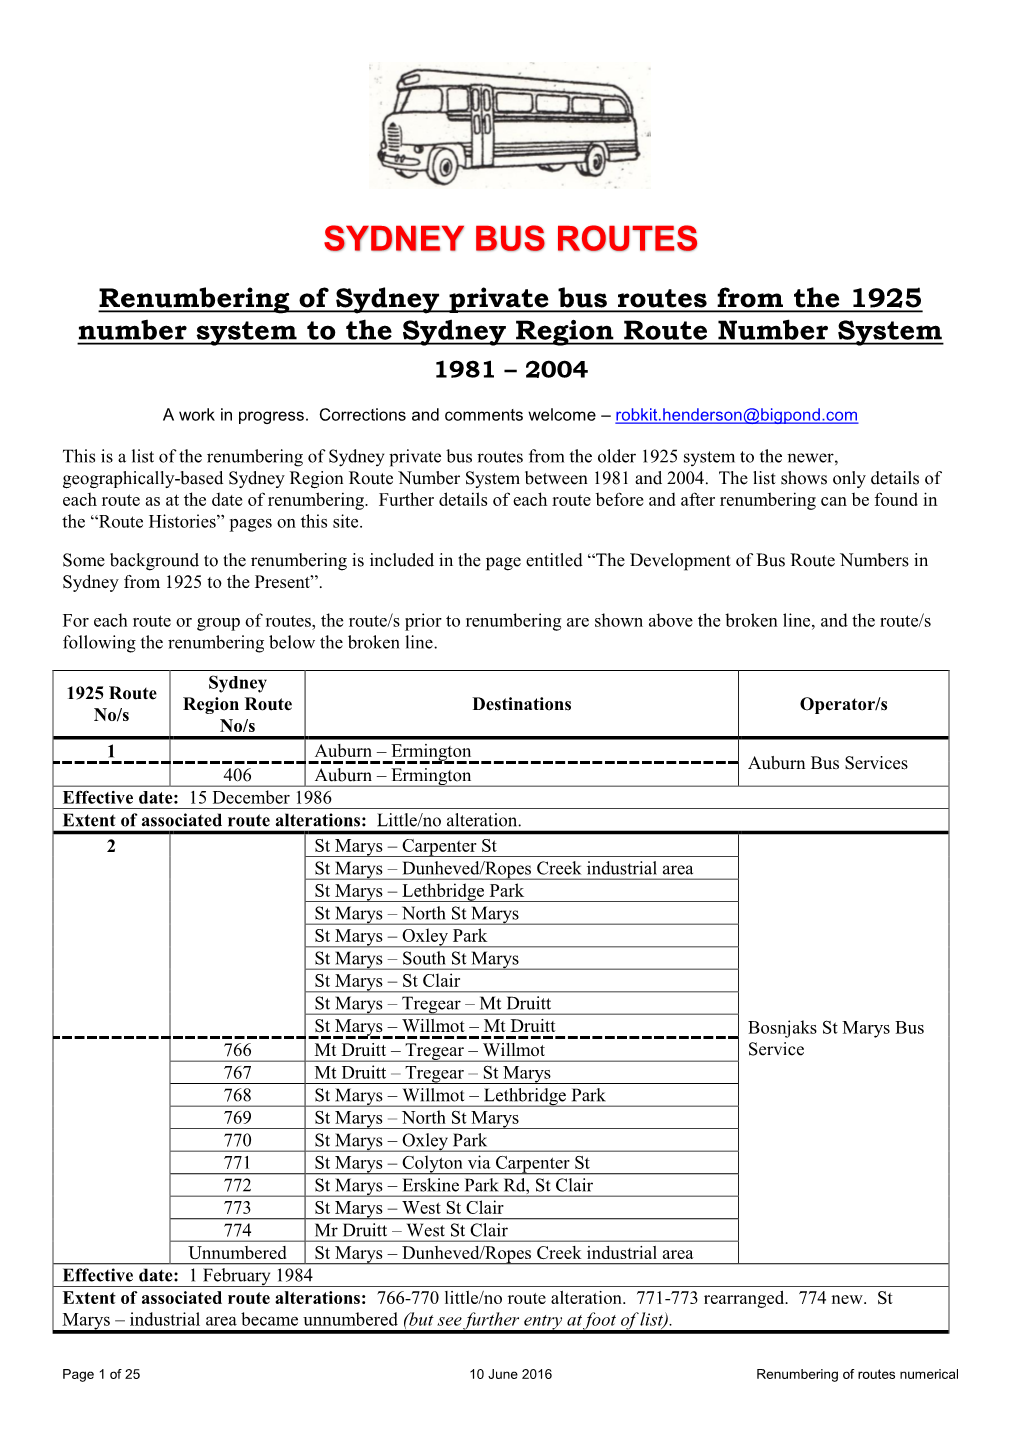 Renumbering of Sydney Private Bus Routes from the 1925 Number System to the Sydney Region Route Number System